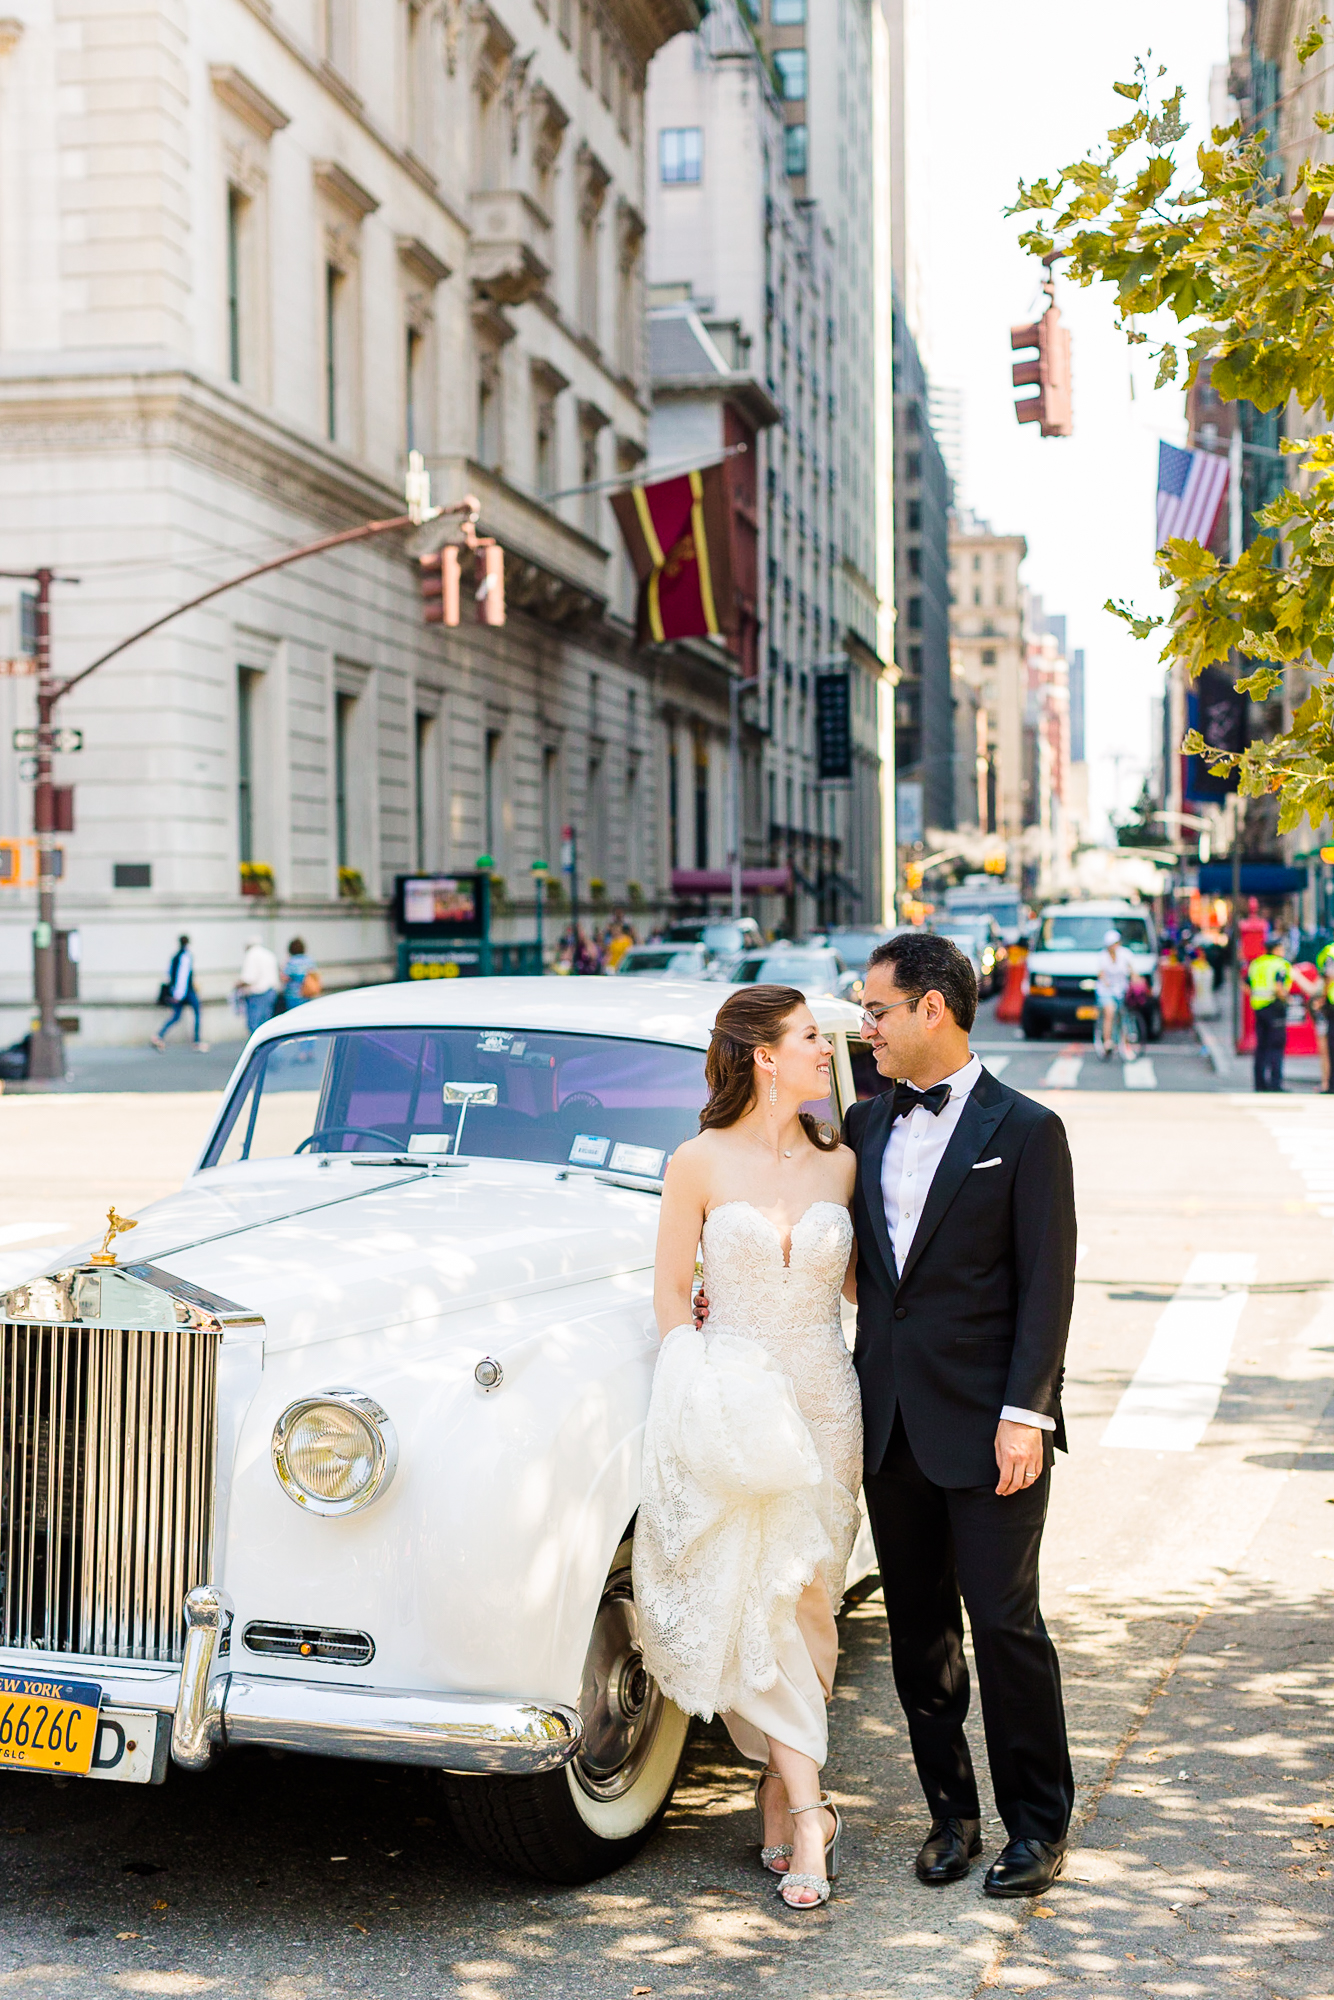 A wedding couple stand next to a vintage car on a busy city street.